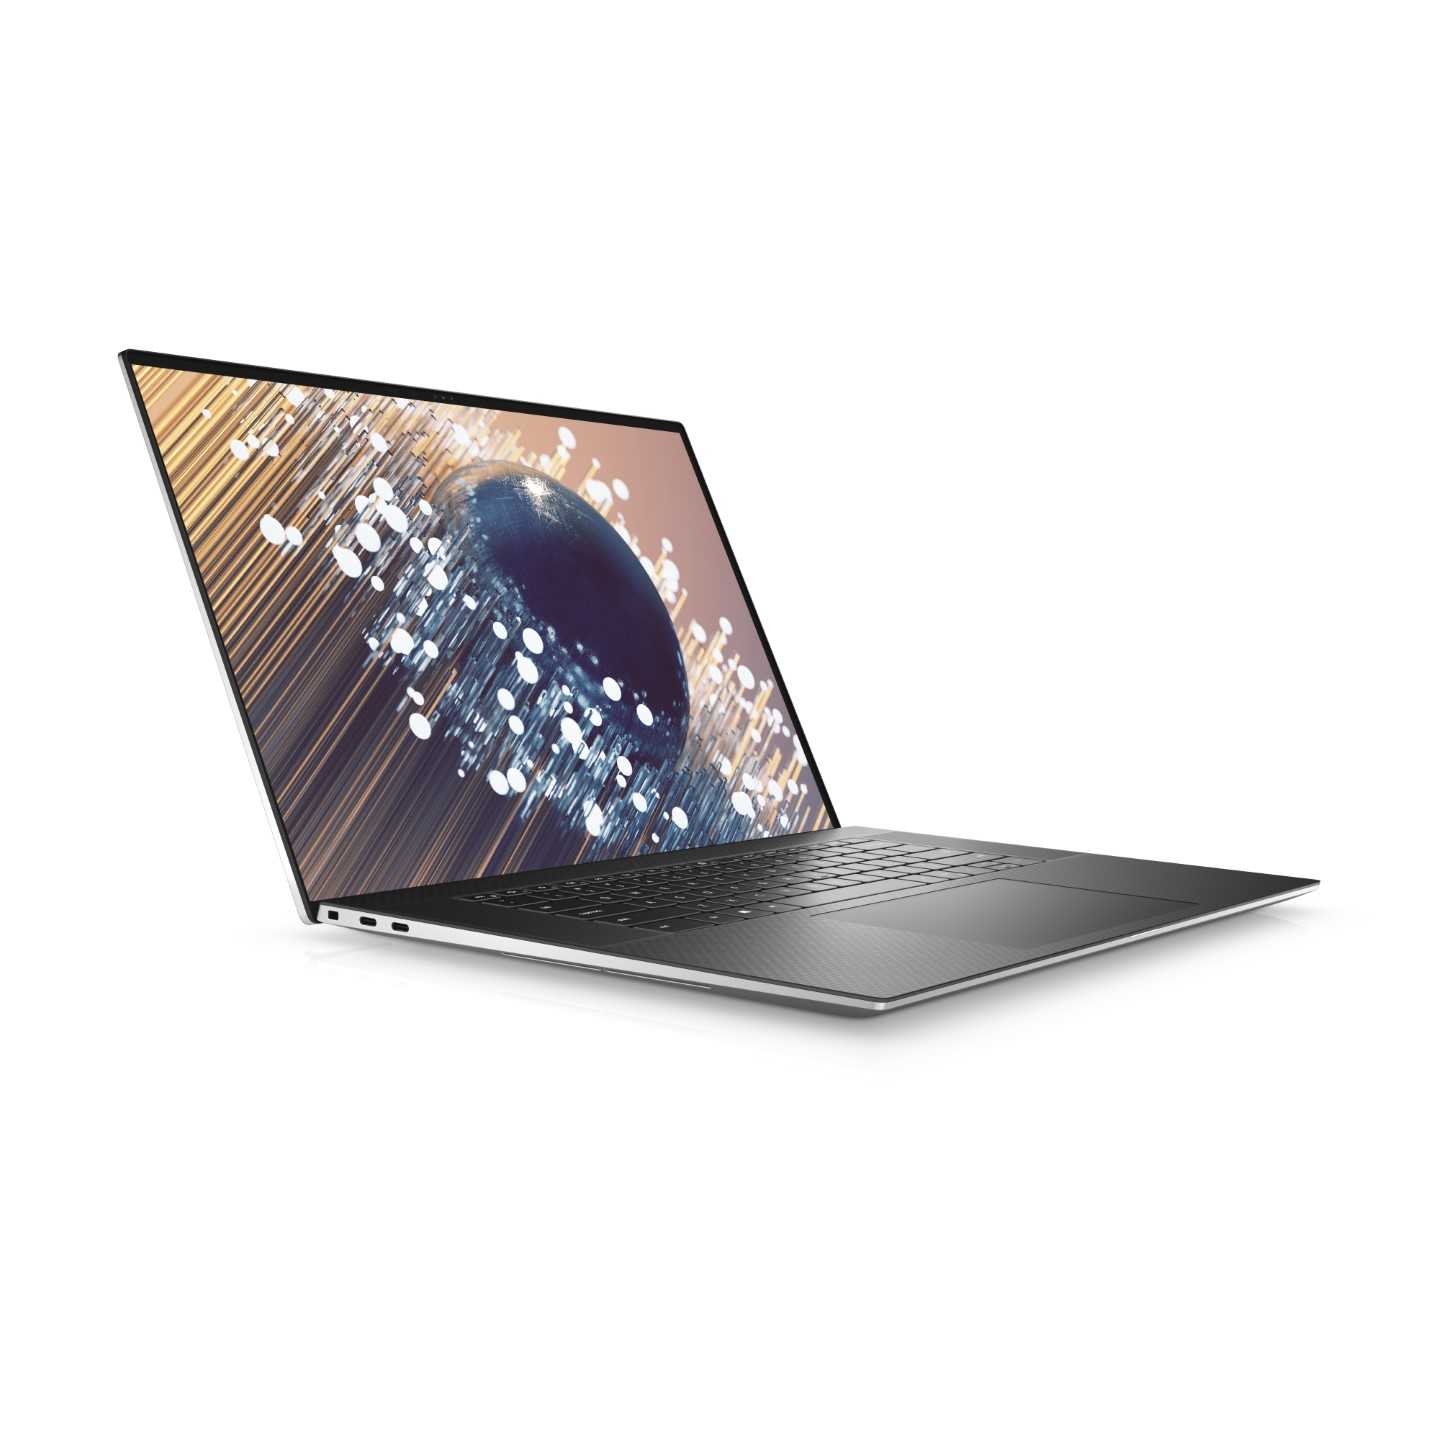 Dell xps 13 9300, 2020 model - what to expect, vs xps 13 7390